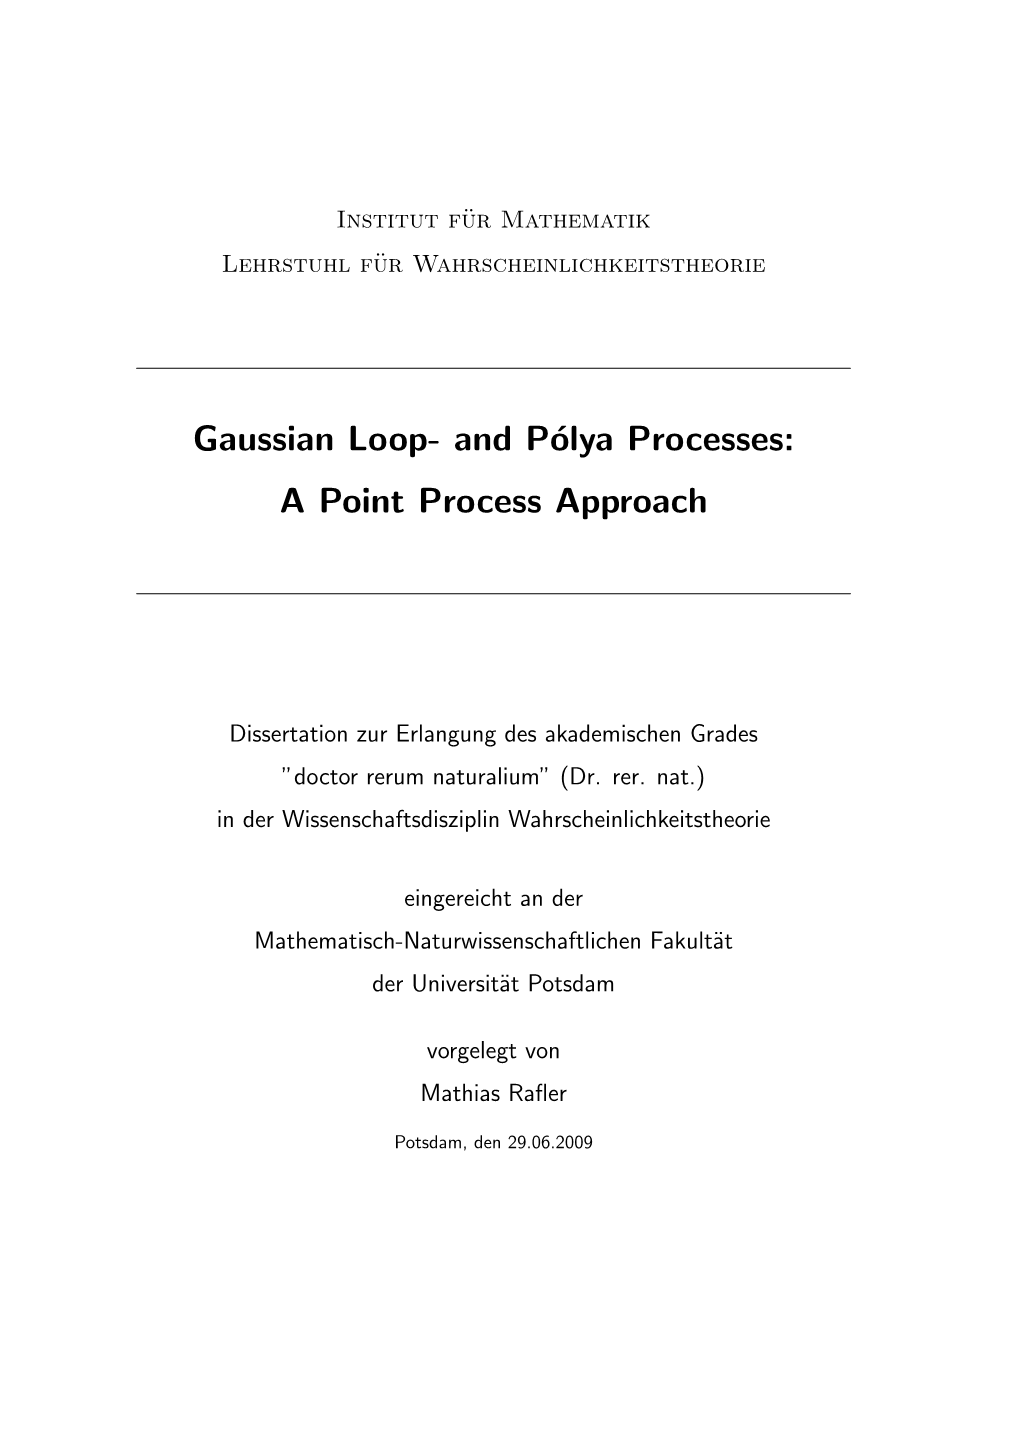 Gaussian Loop- and Polya Processes: a Point Process Approach